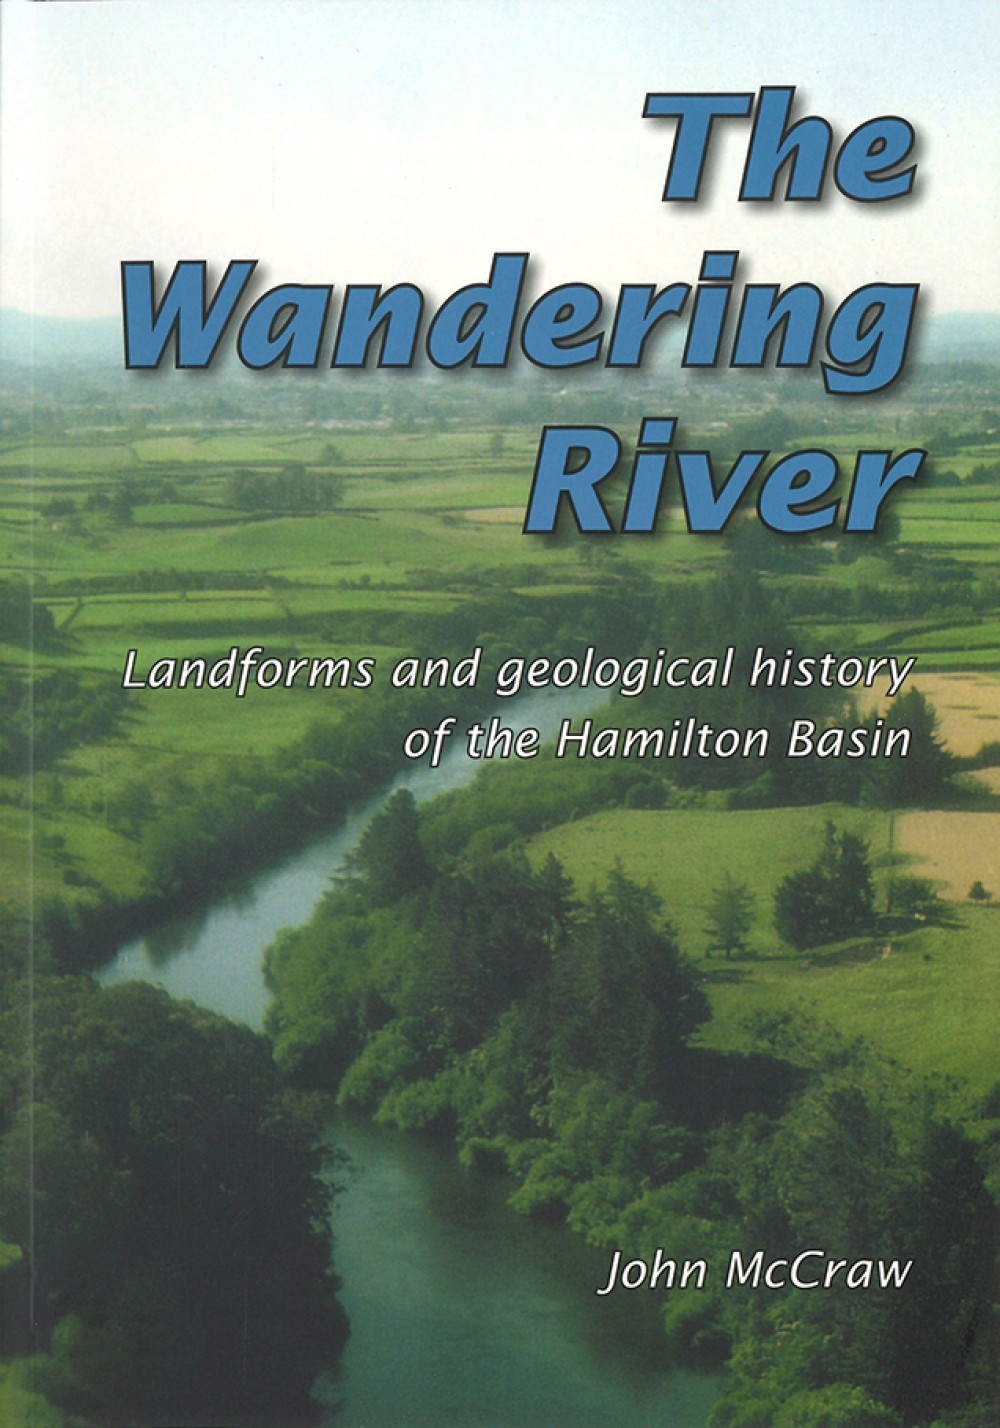 GB16 Wandering River cover image 96dpi